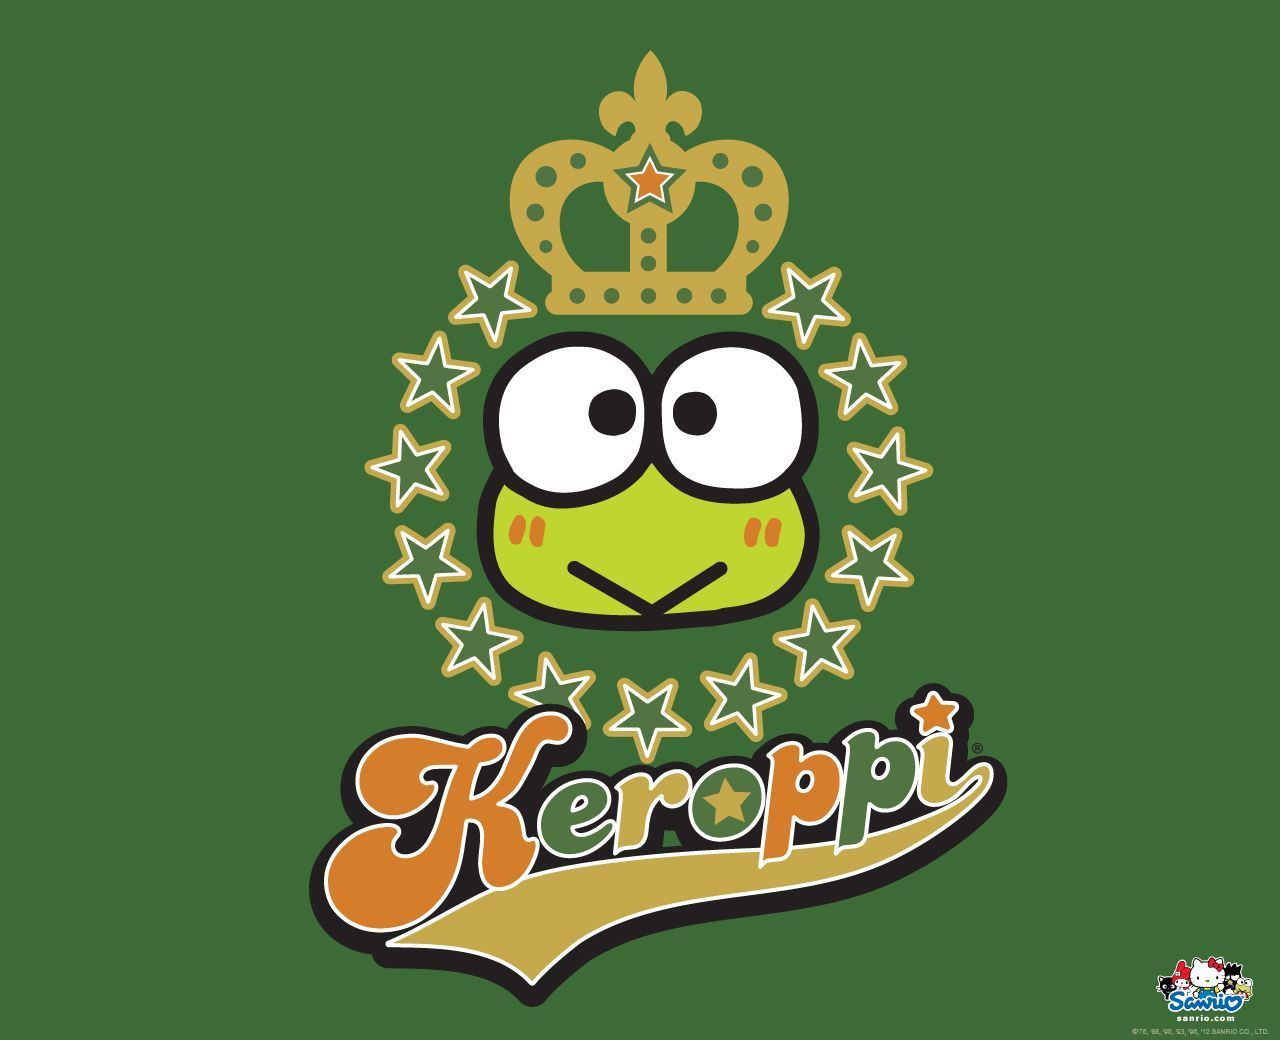 A green background with the word keroppi on it - Keroppi